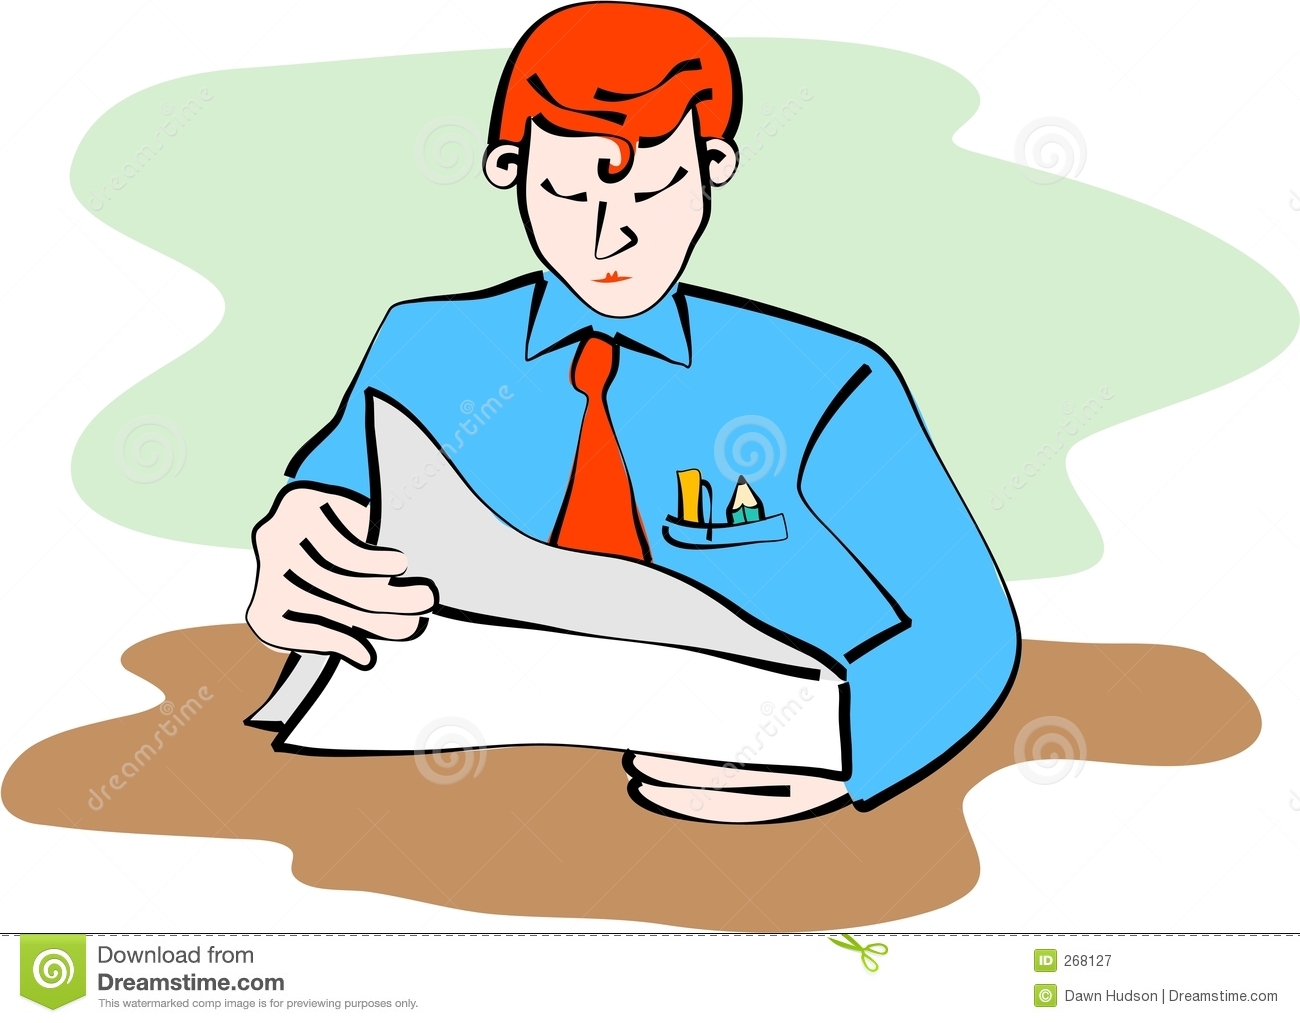 clipart in ms office 13 - photo #14